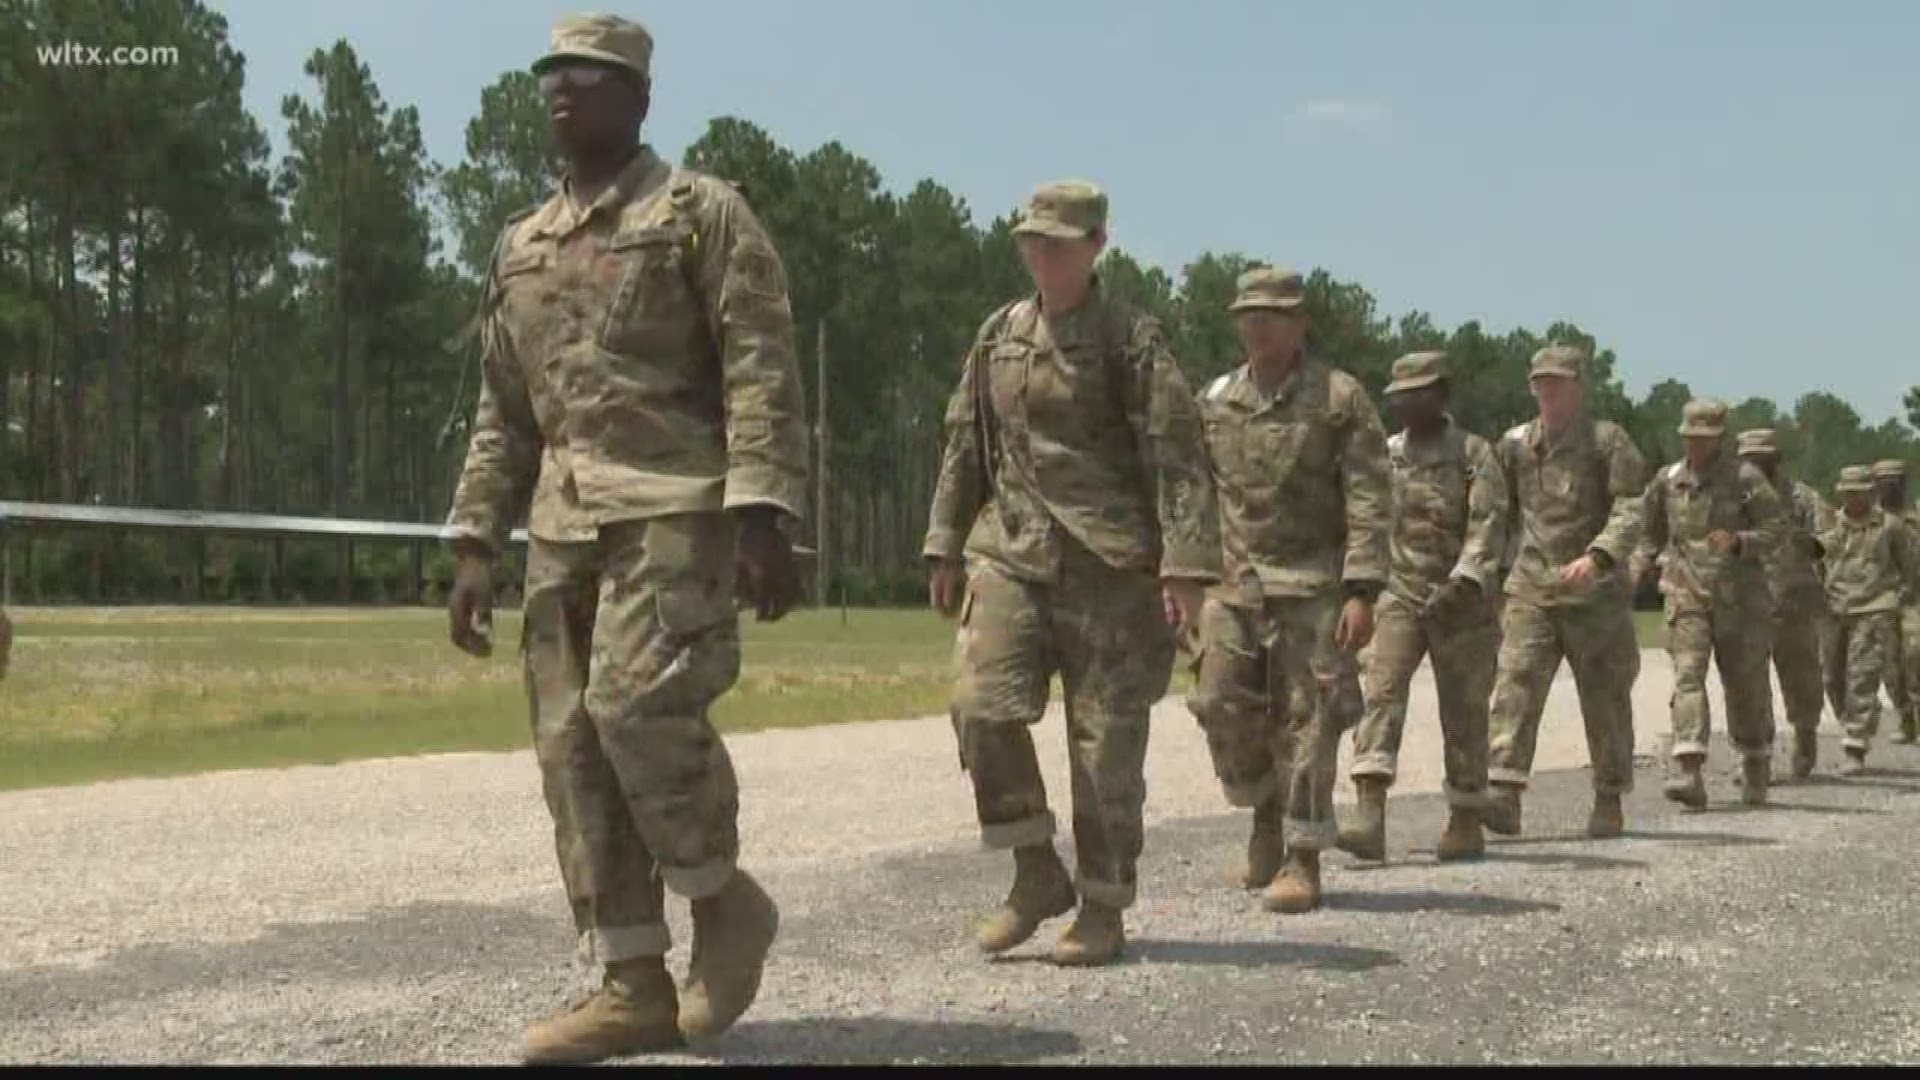 The Army says it will not be shipping recruits because of the coronavirus.